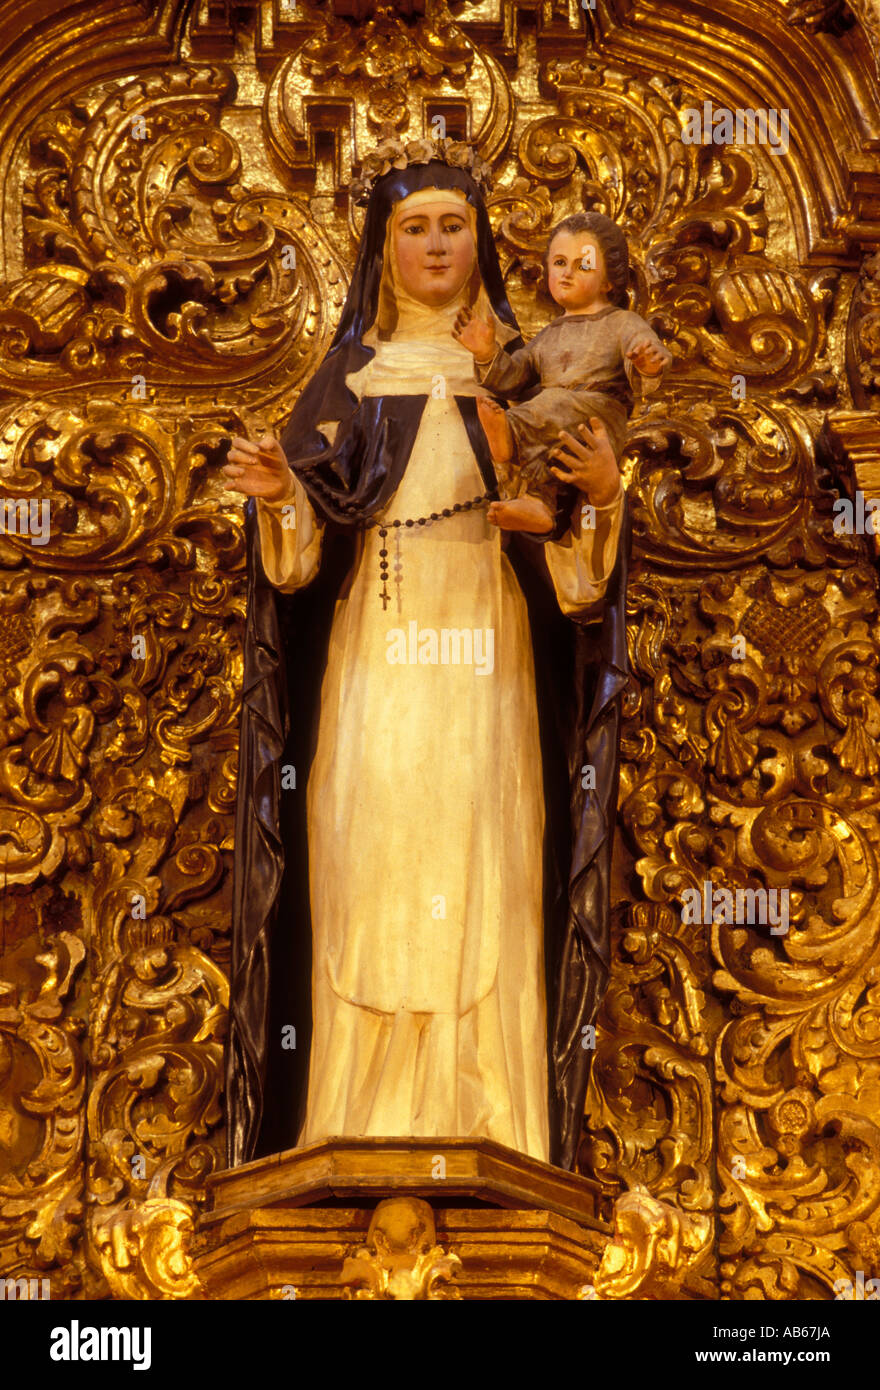 Virgin Mary with Christ as Child, Virgin Mary, Christ as Child, baby Jesus, Jesus Christ, Las Rosas Church, Morelia, Michoacan State, Mexico Stock Photo